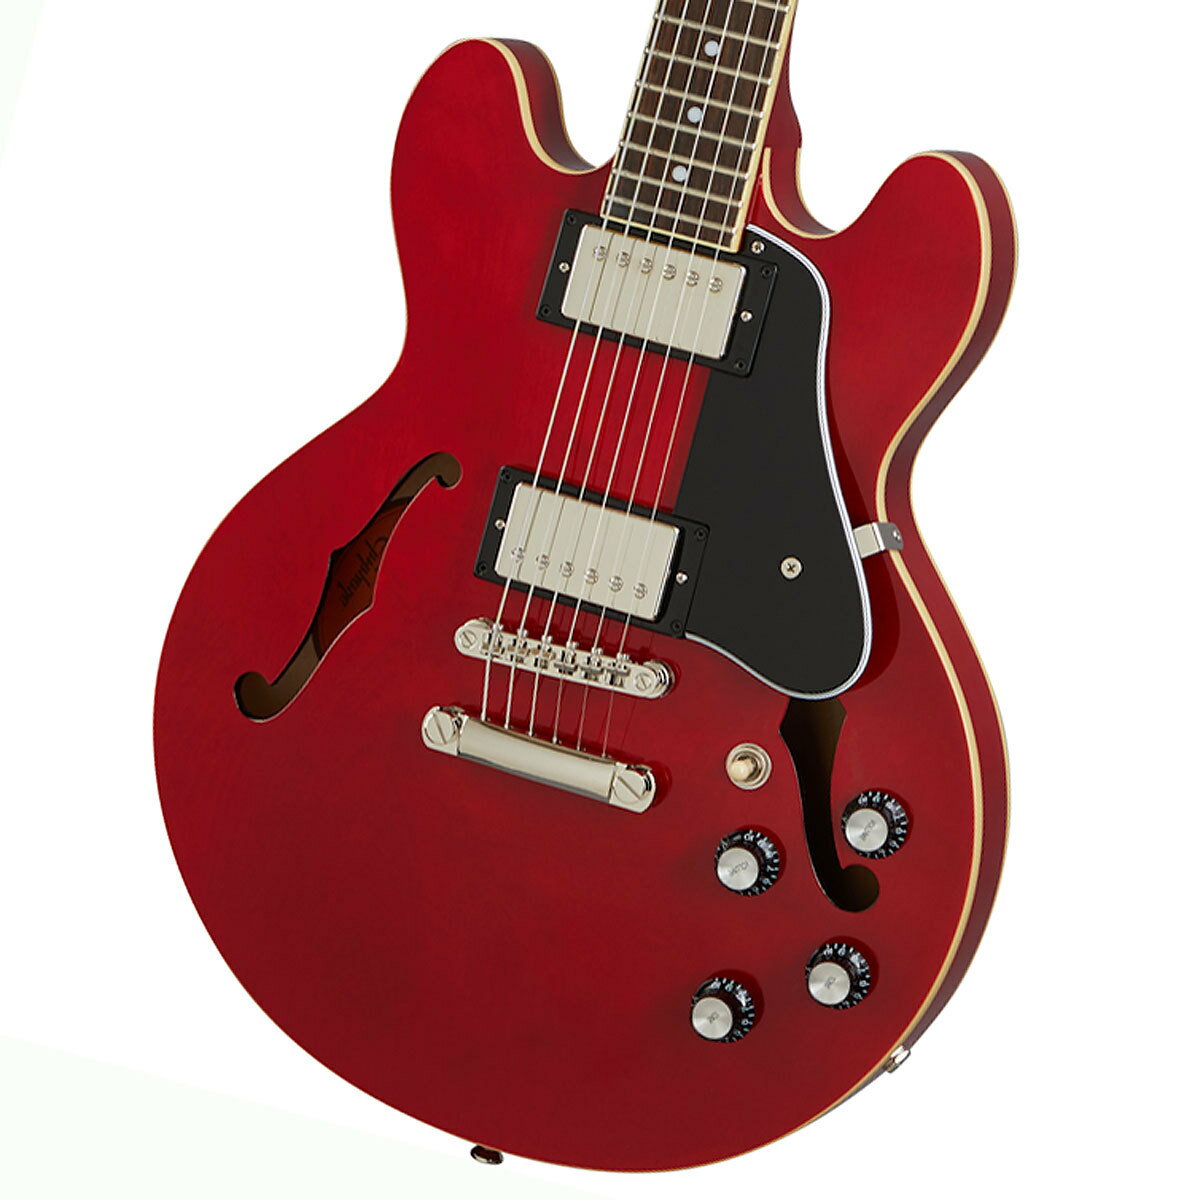 Epiphone / Inspired by Gibson ES-339 Cherry (CH) エピフォン エレキギター セミアコ ES339 【横浜店】